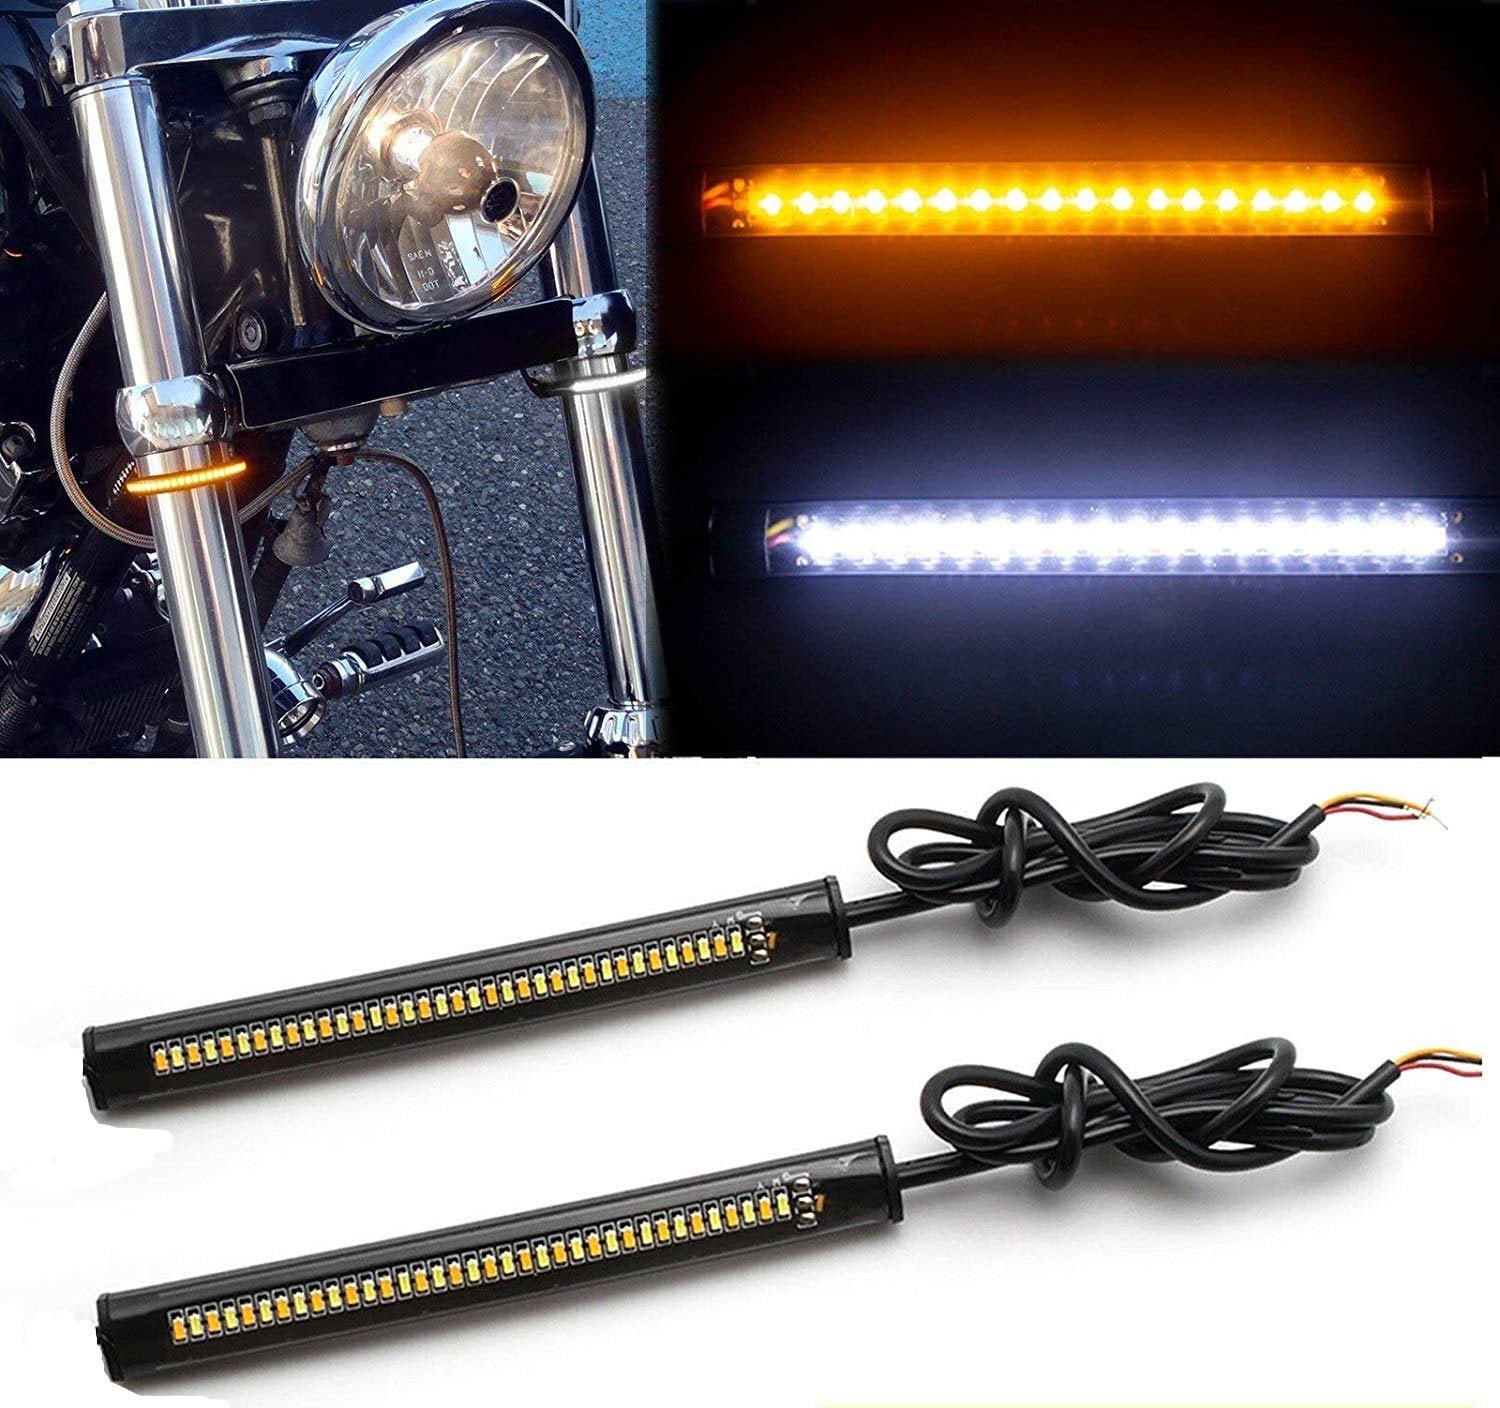 LED SMD 2 inch Amber Car Lighting with Anti-flickering Device Complete LGB 